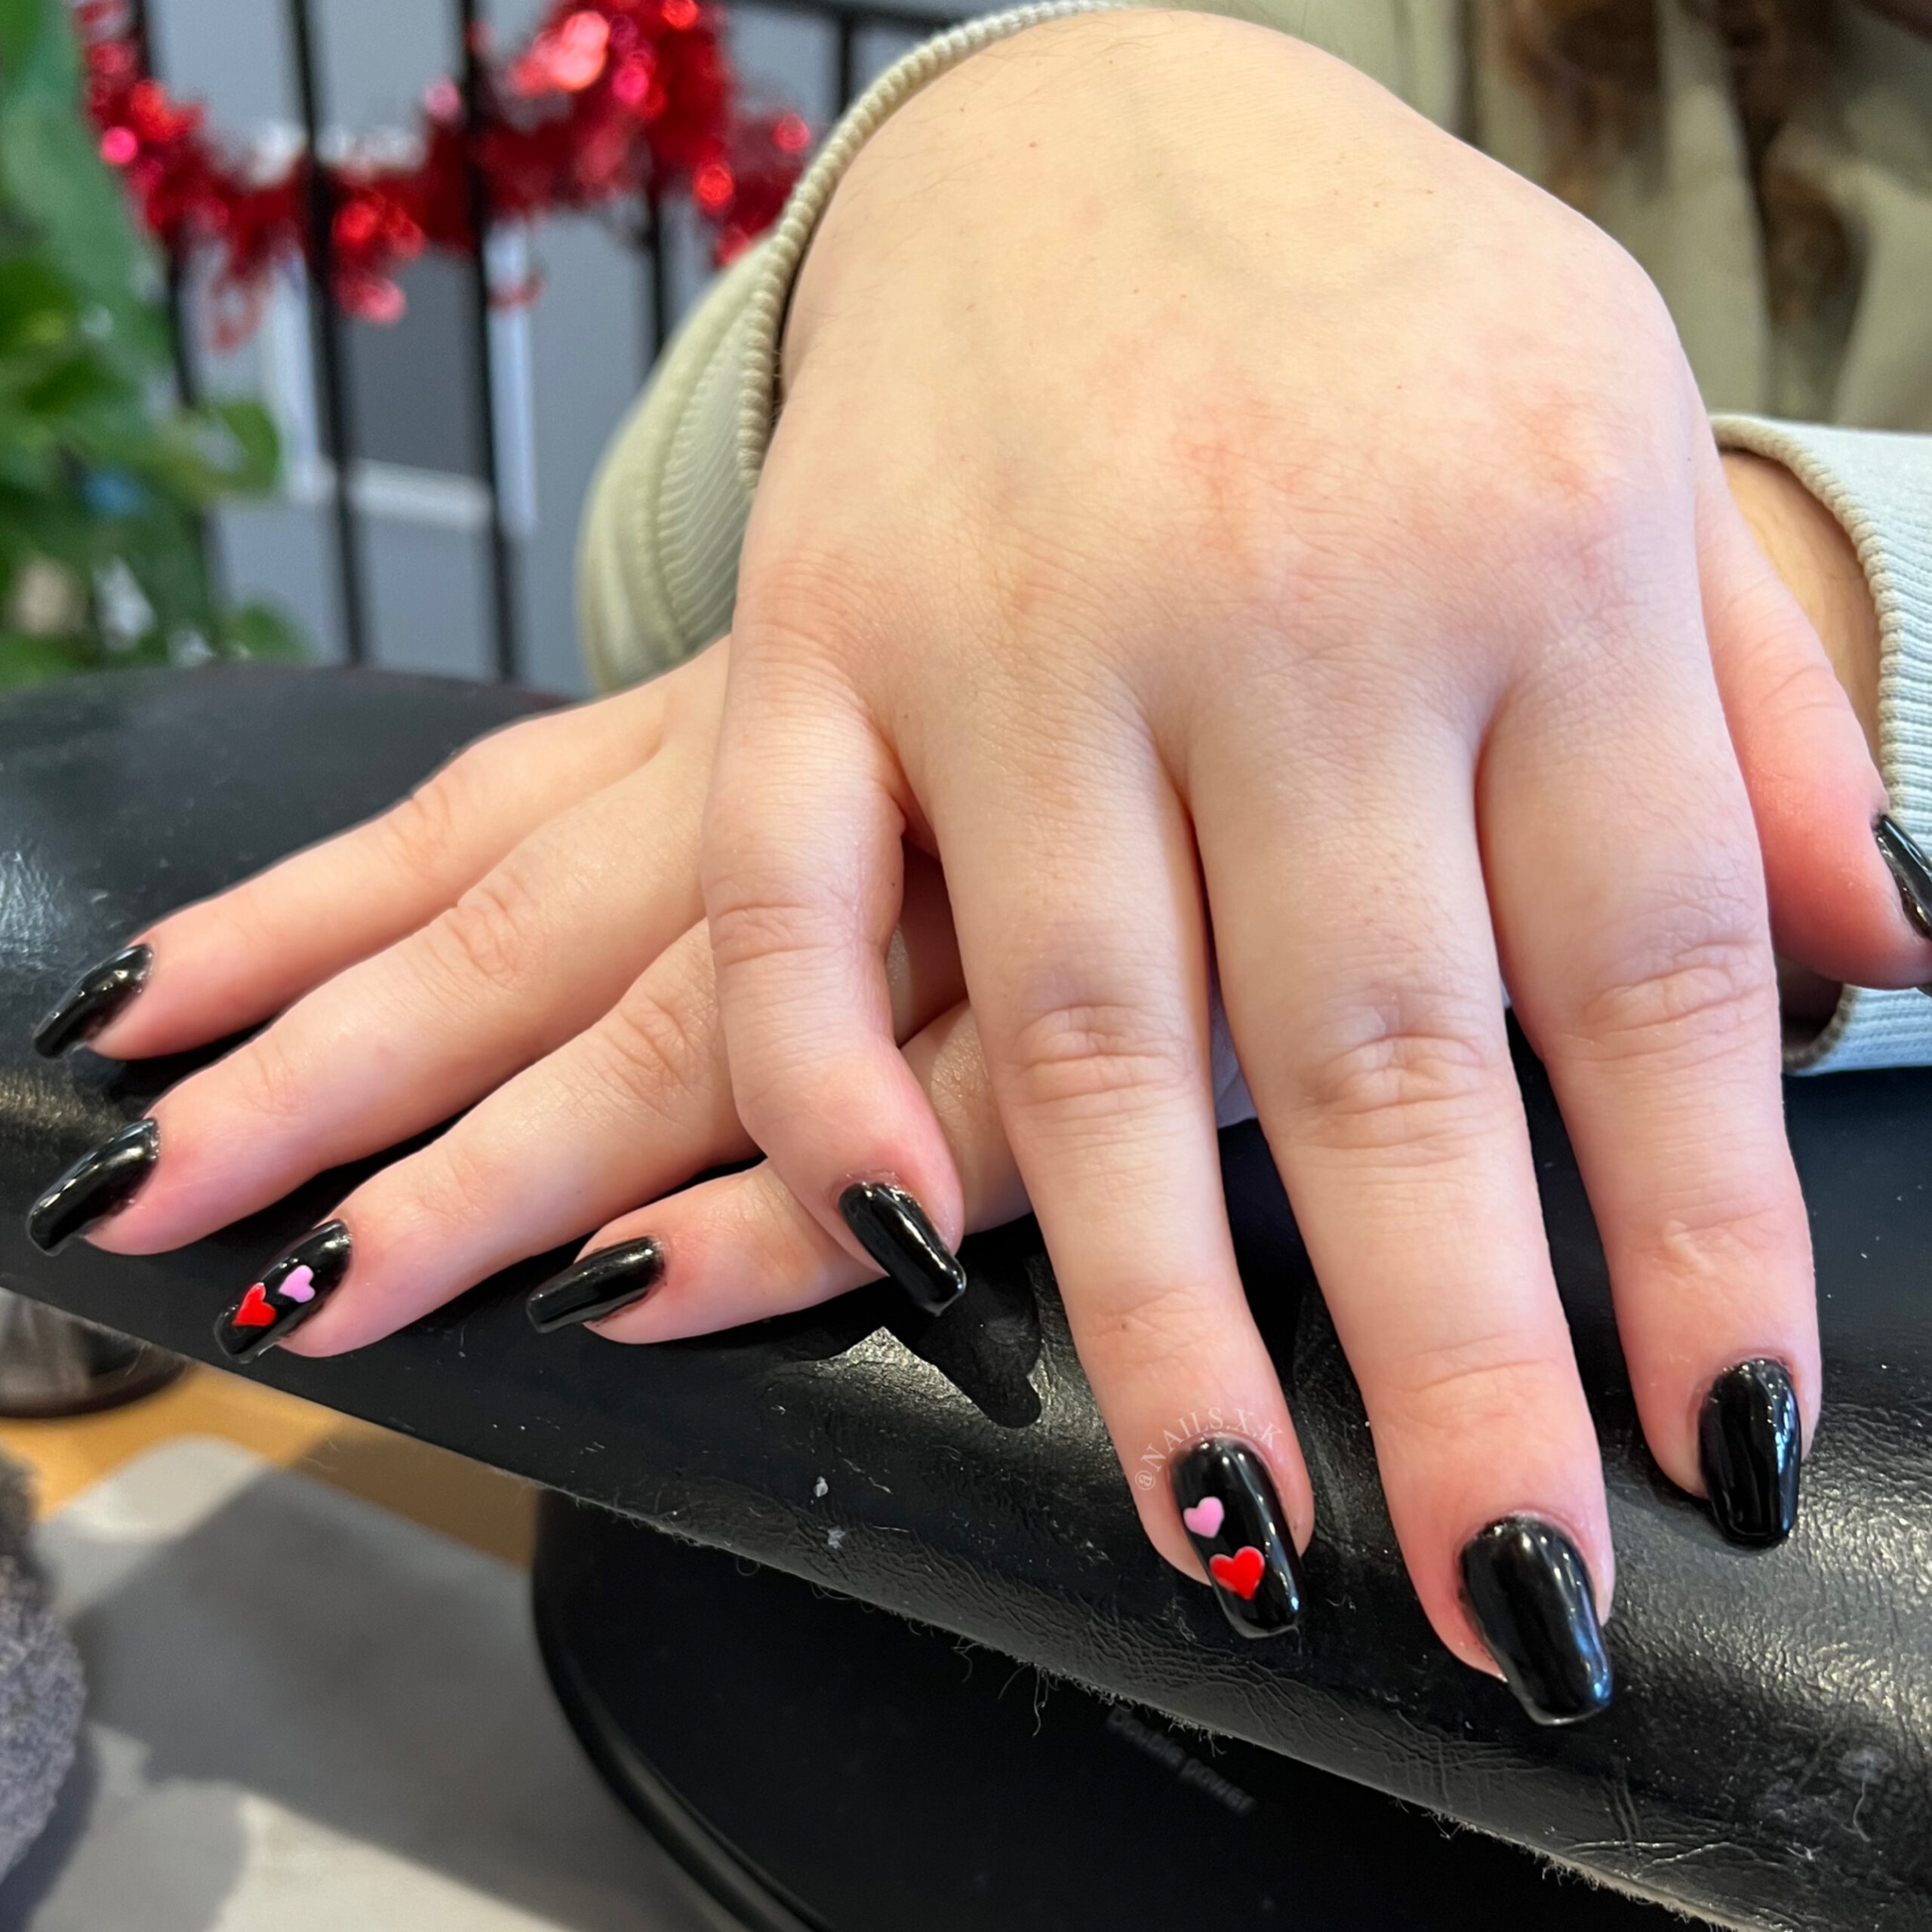 Gel manicure with black and hand painted heart accent nails. Nails by K